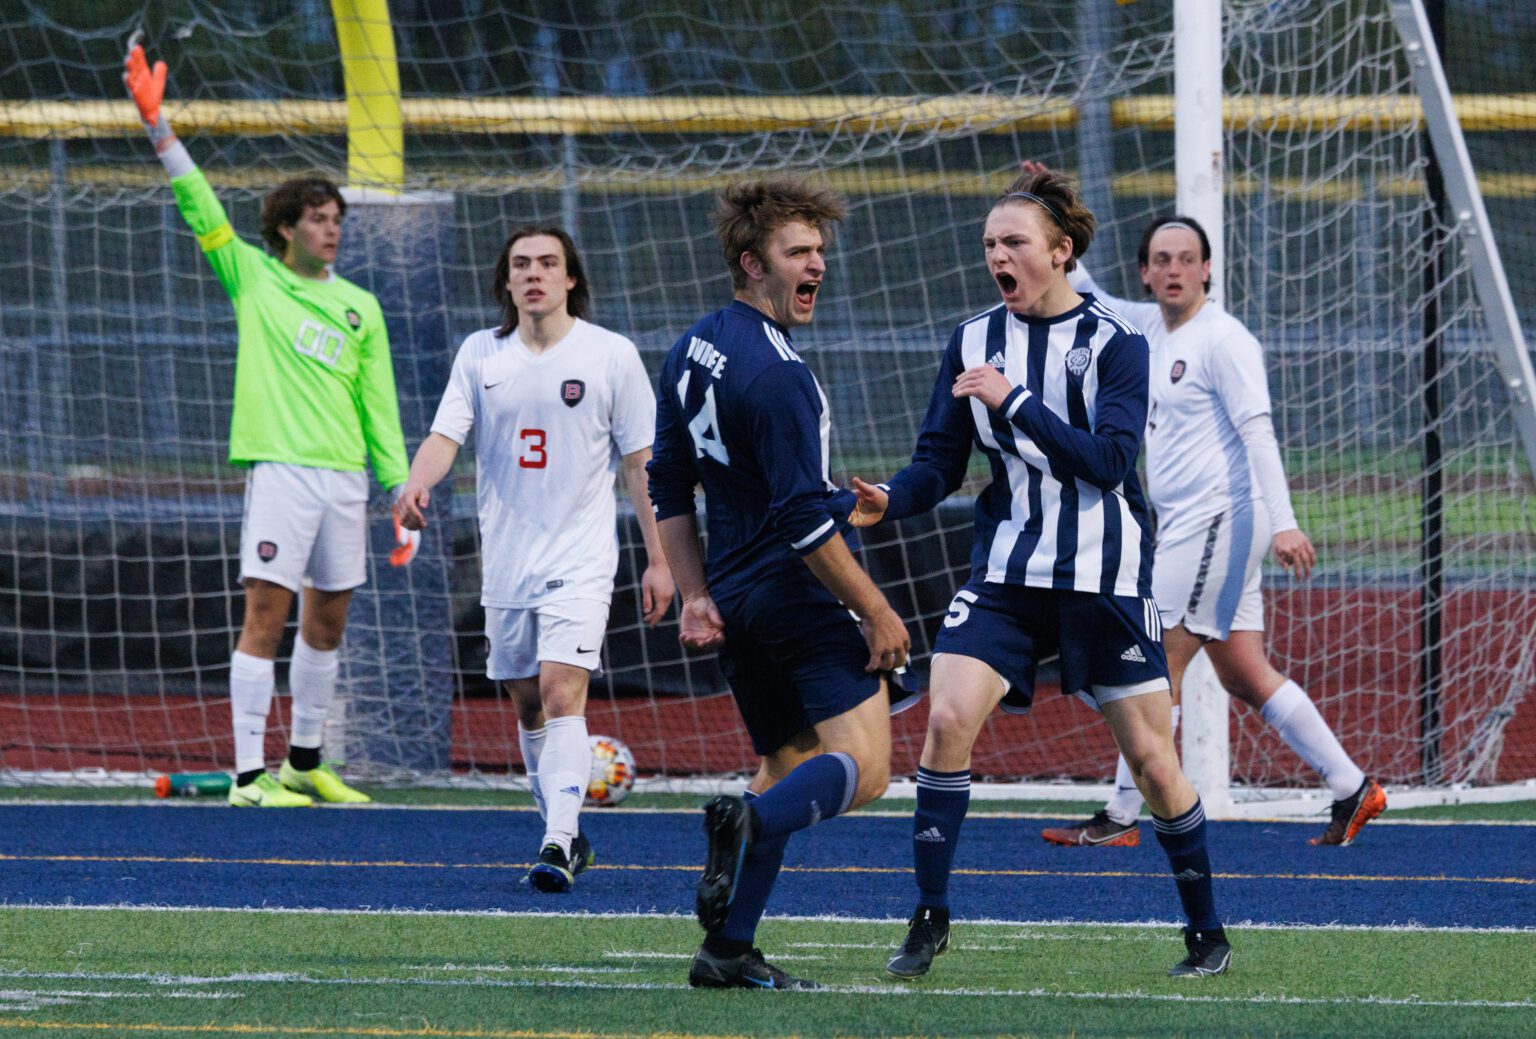 Squalicum's Joshua Durfee (14) cheers after scoring a goal as Squalicum beat Bellingham 2-0 in a matchup of the Northwest Conference leaders on April 20 at Squalicum High School.